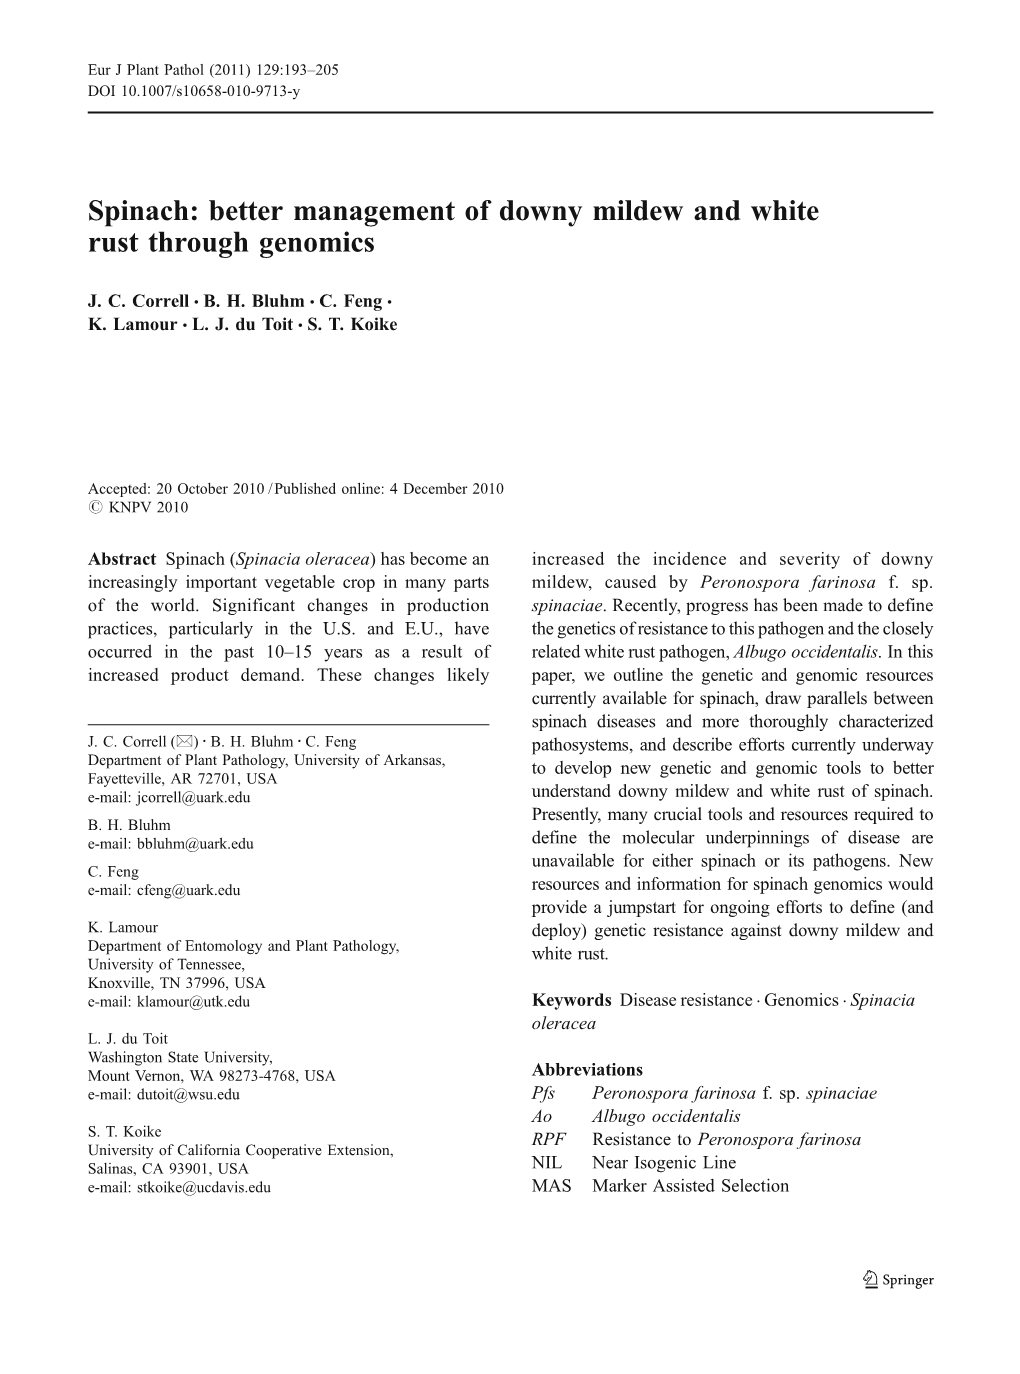 Spinach: Better Management of Downy Mildew and White Rust Through Genomics